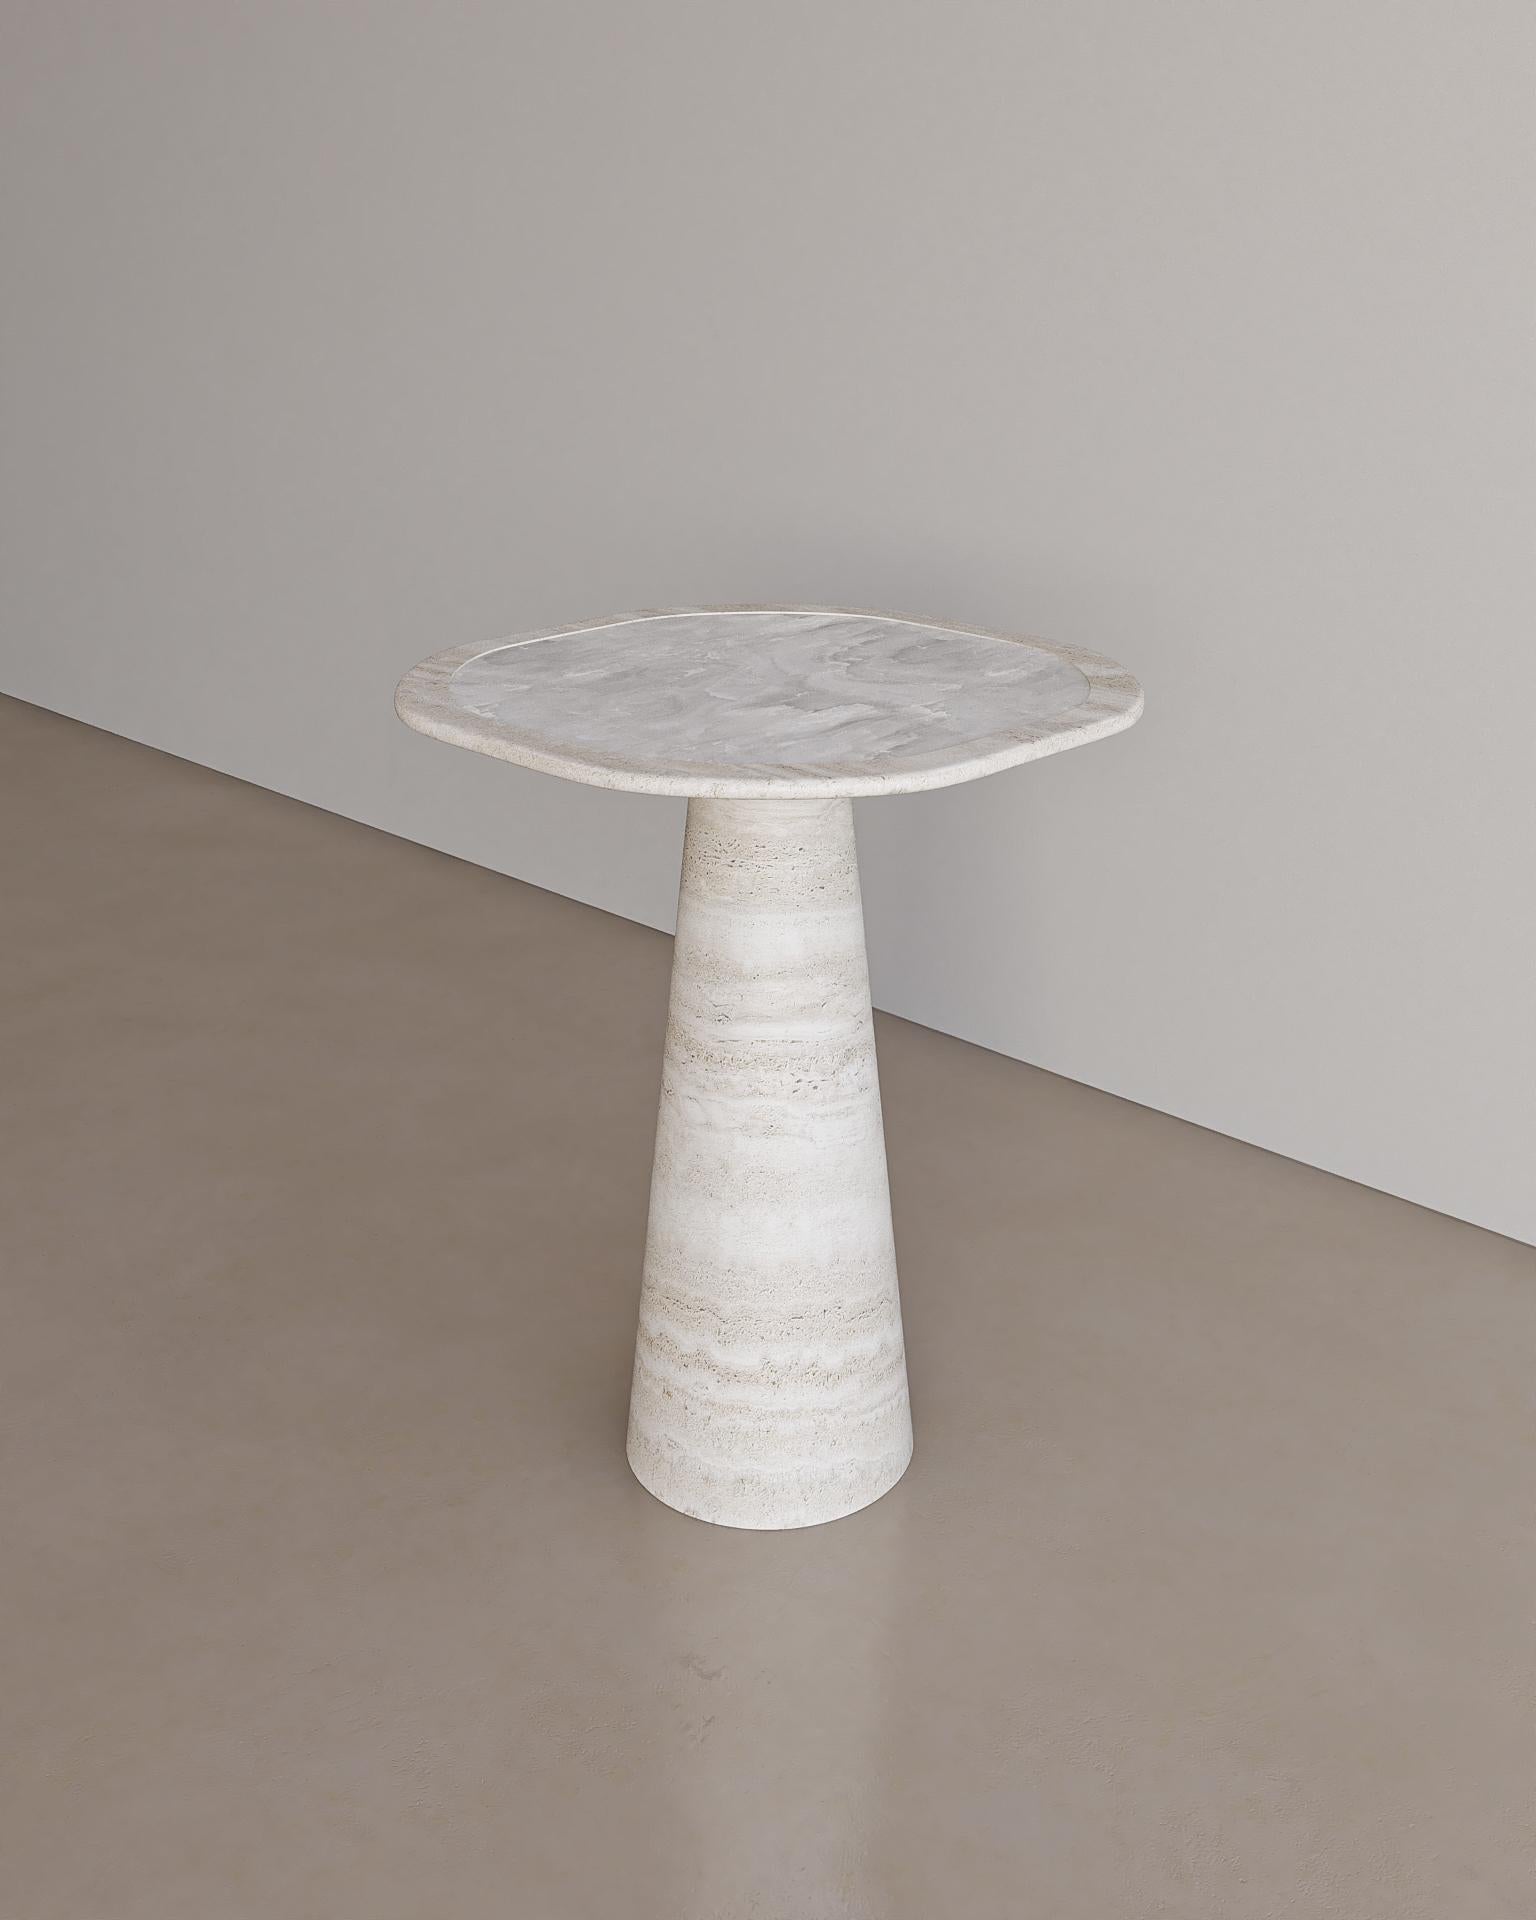 Contemporary Eros Foyer Table in Italian Bianco Travertine with a Viola Heart For Sale